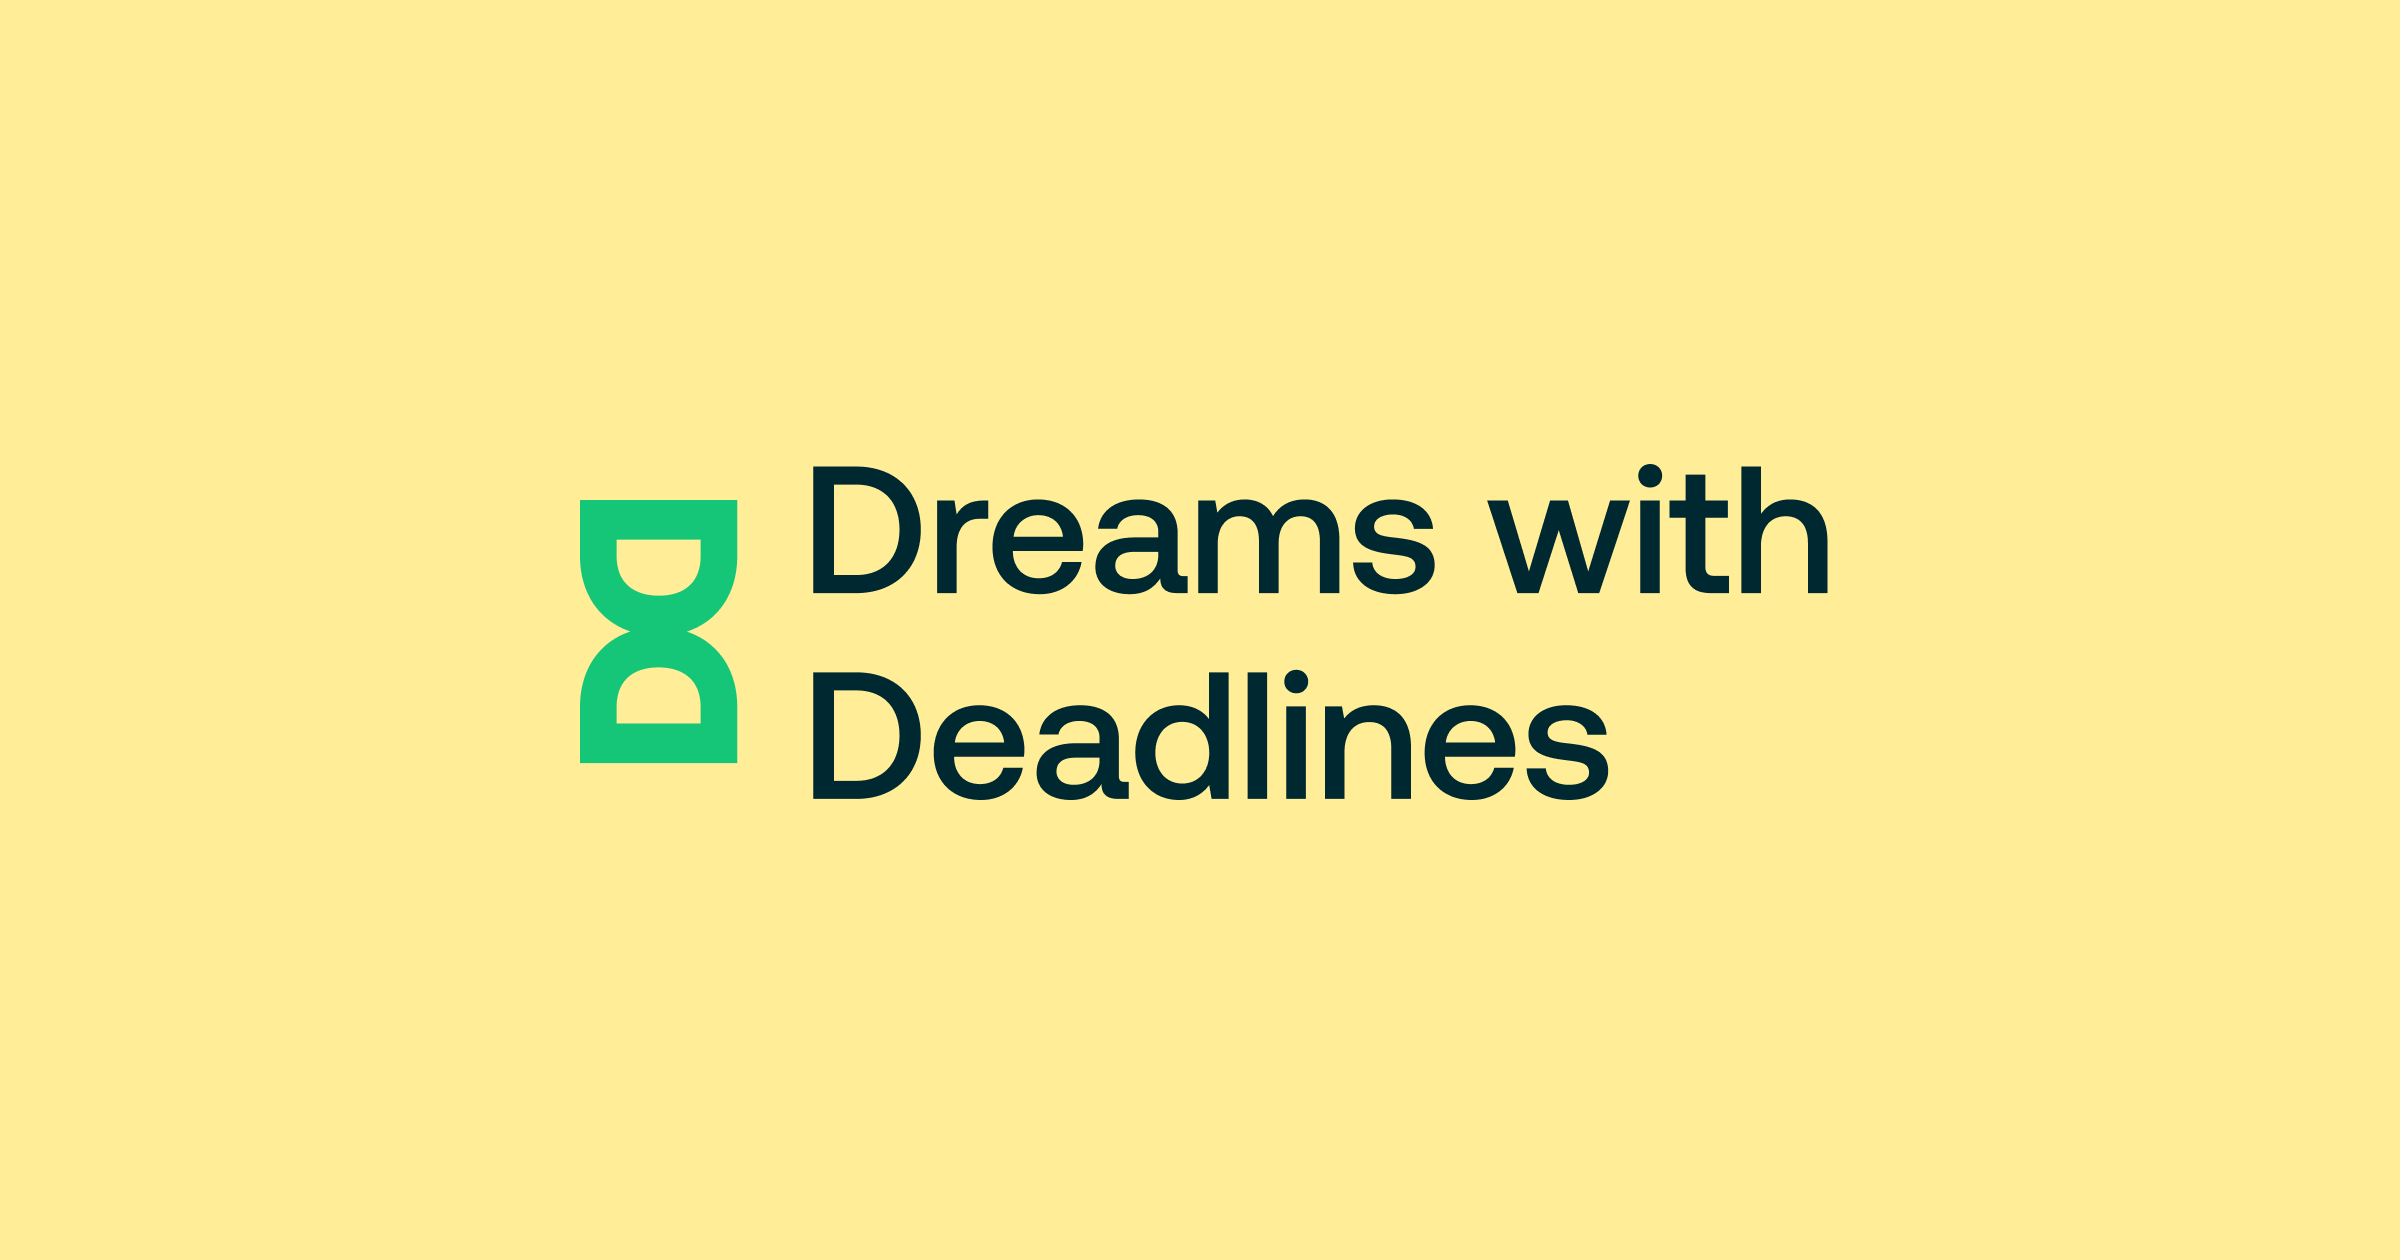 Dreams with Deadlines logo on yellow background